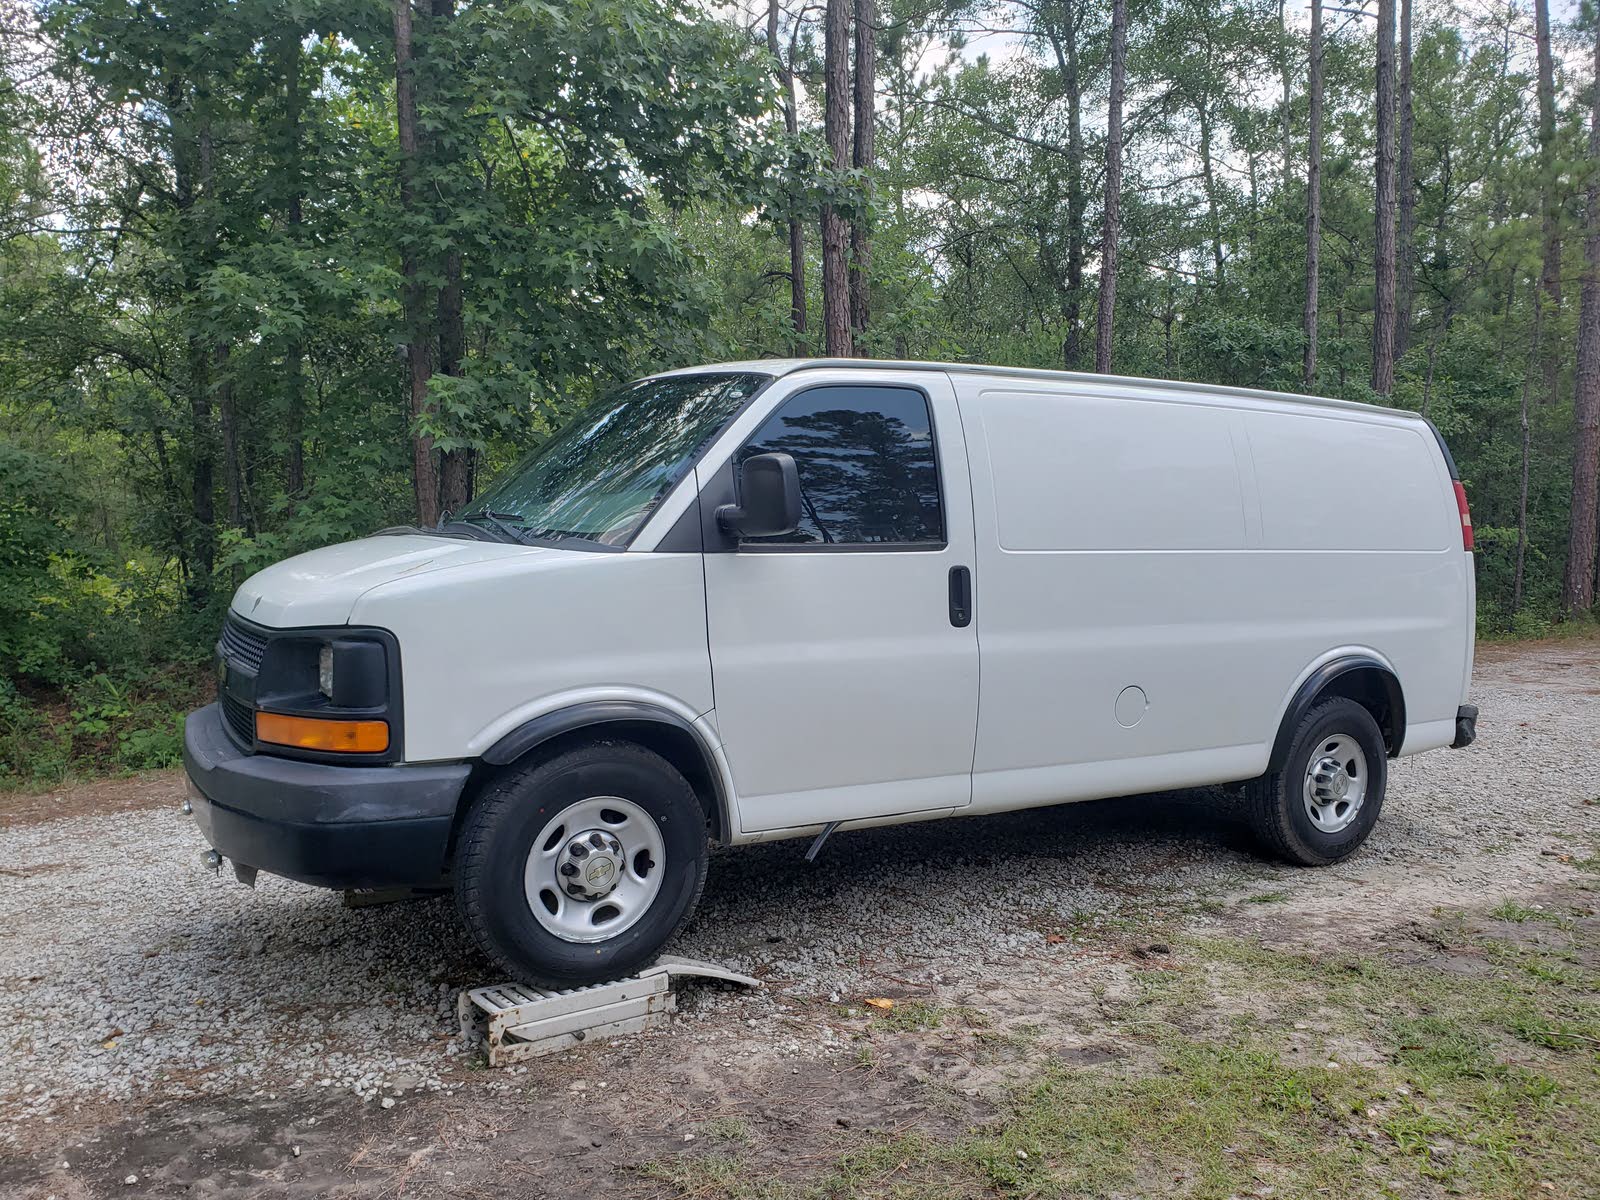 chevy express cargo van for sale